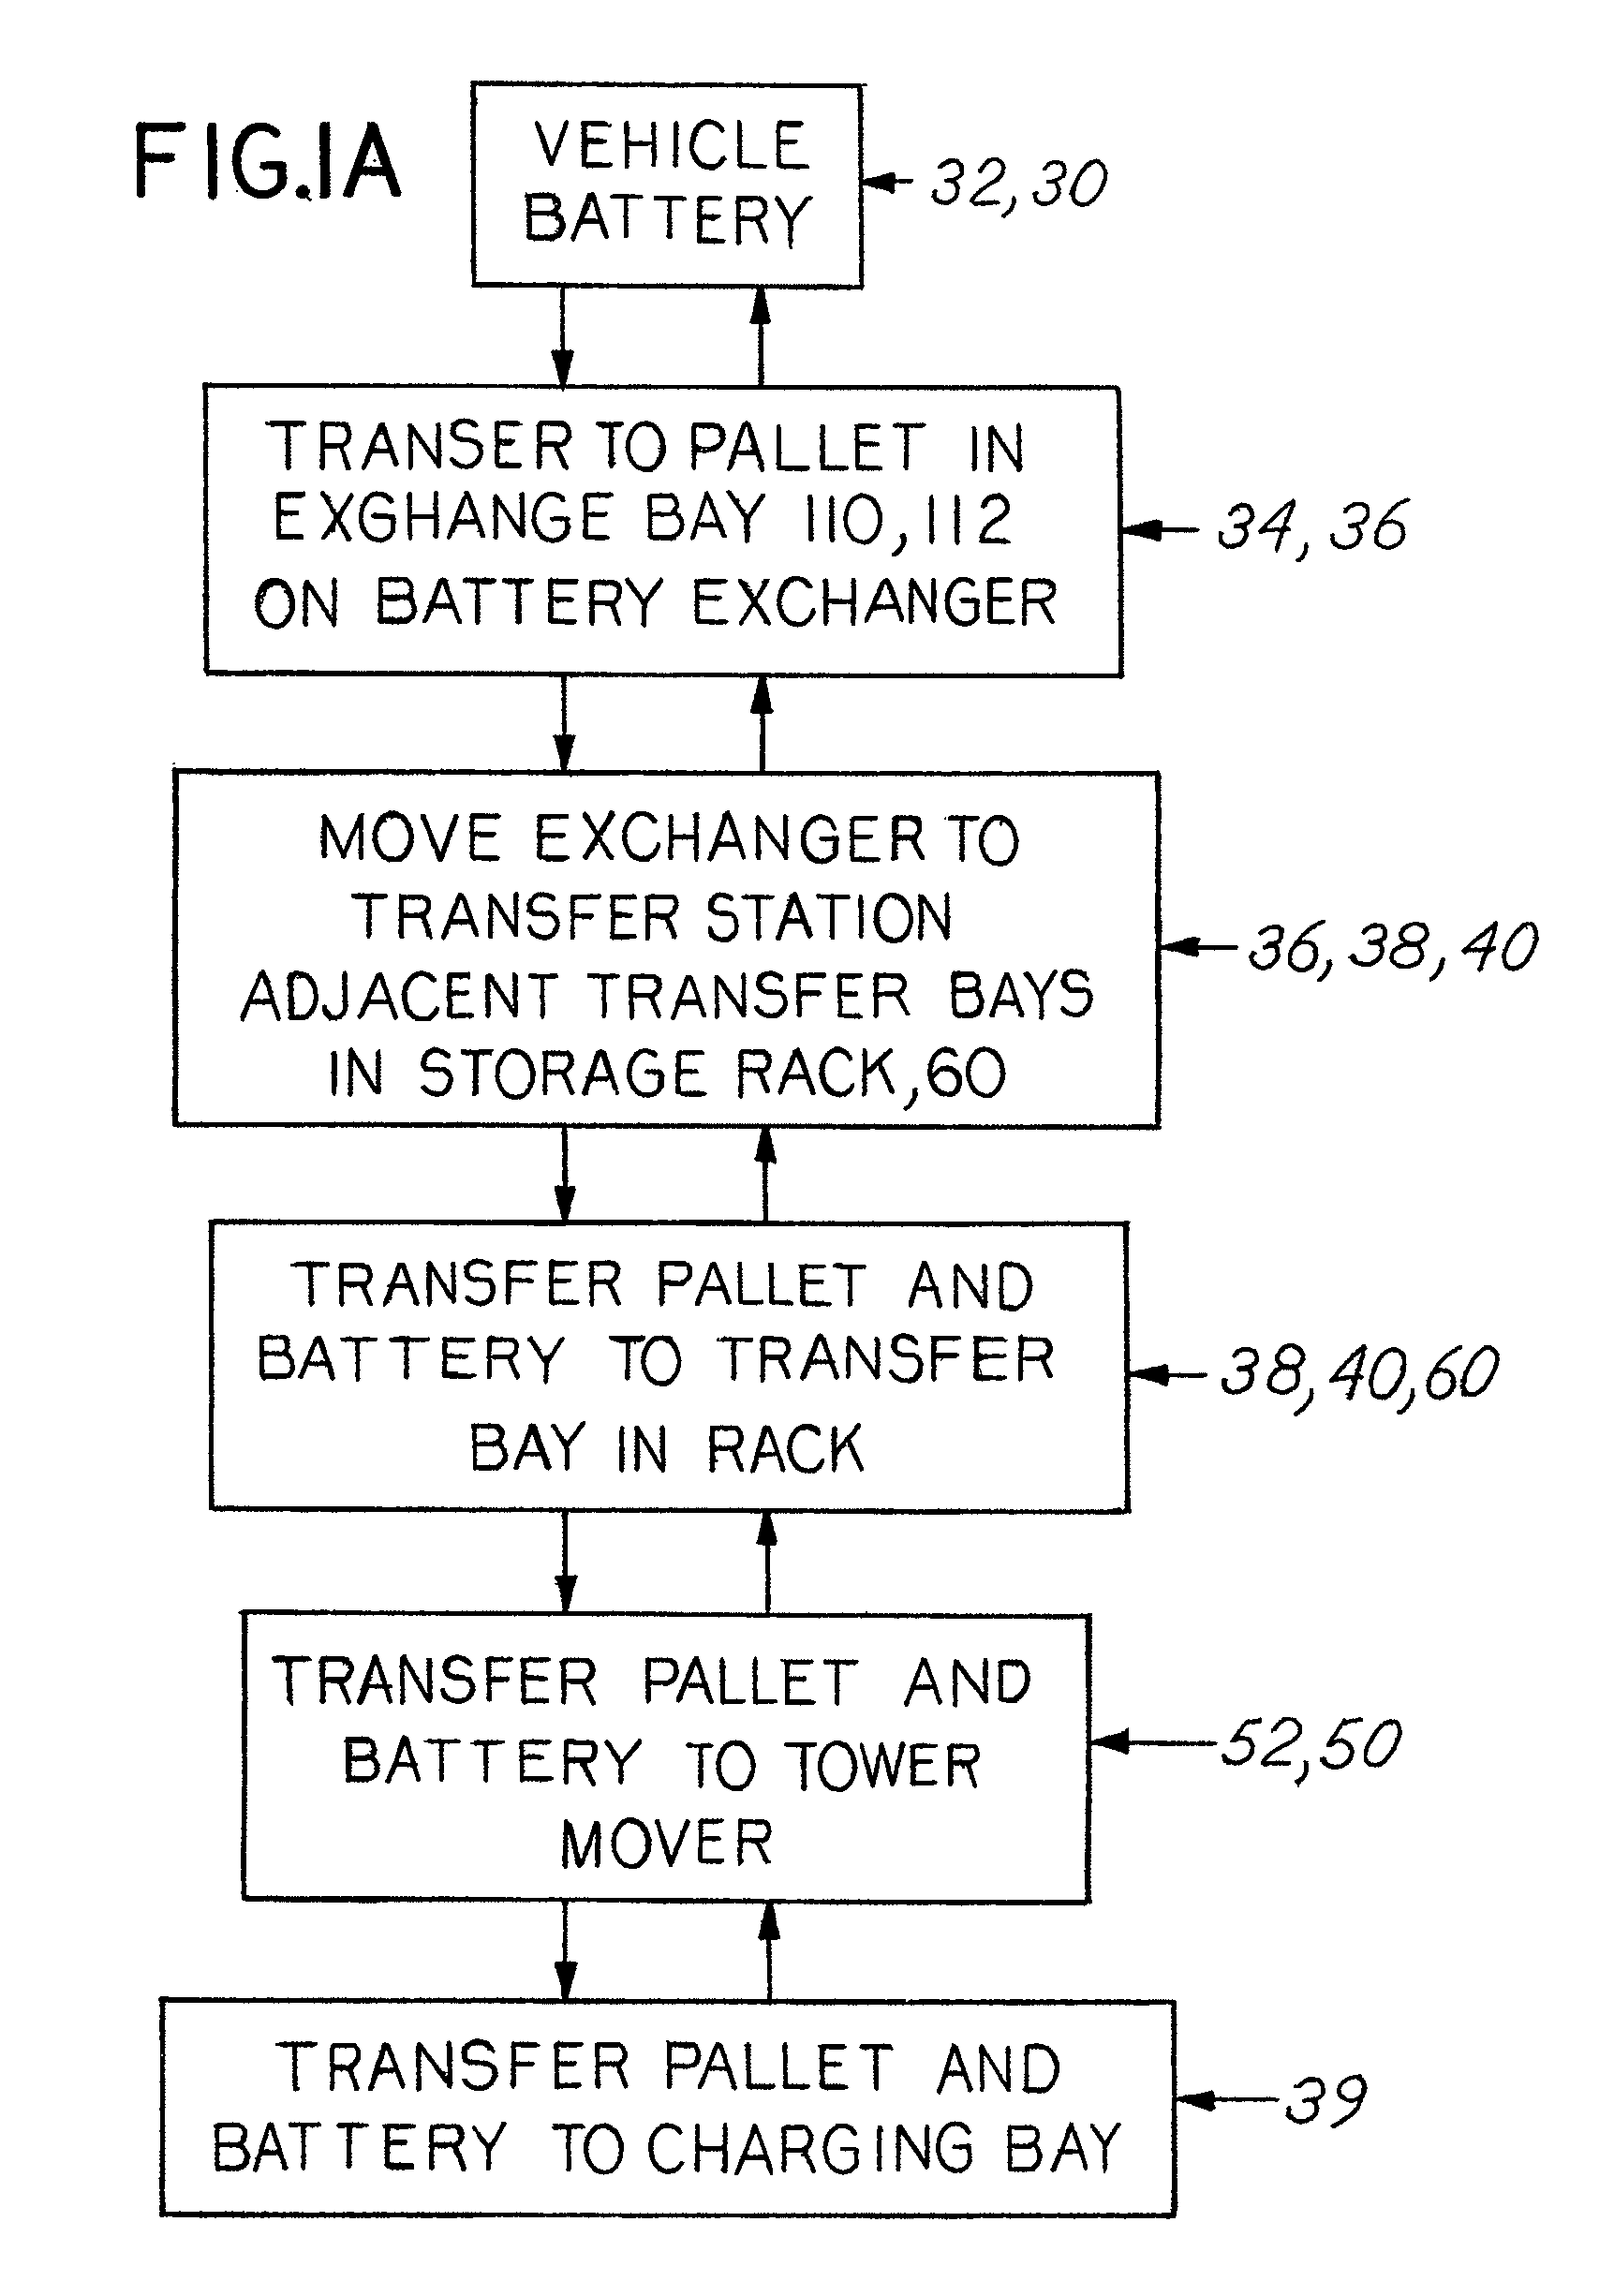 Industrial battery charging, storage and handling system